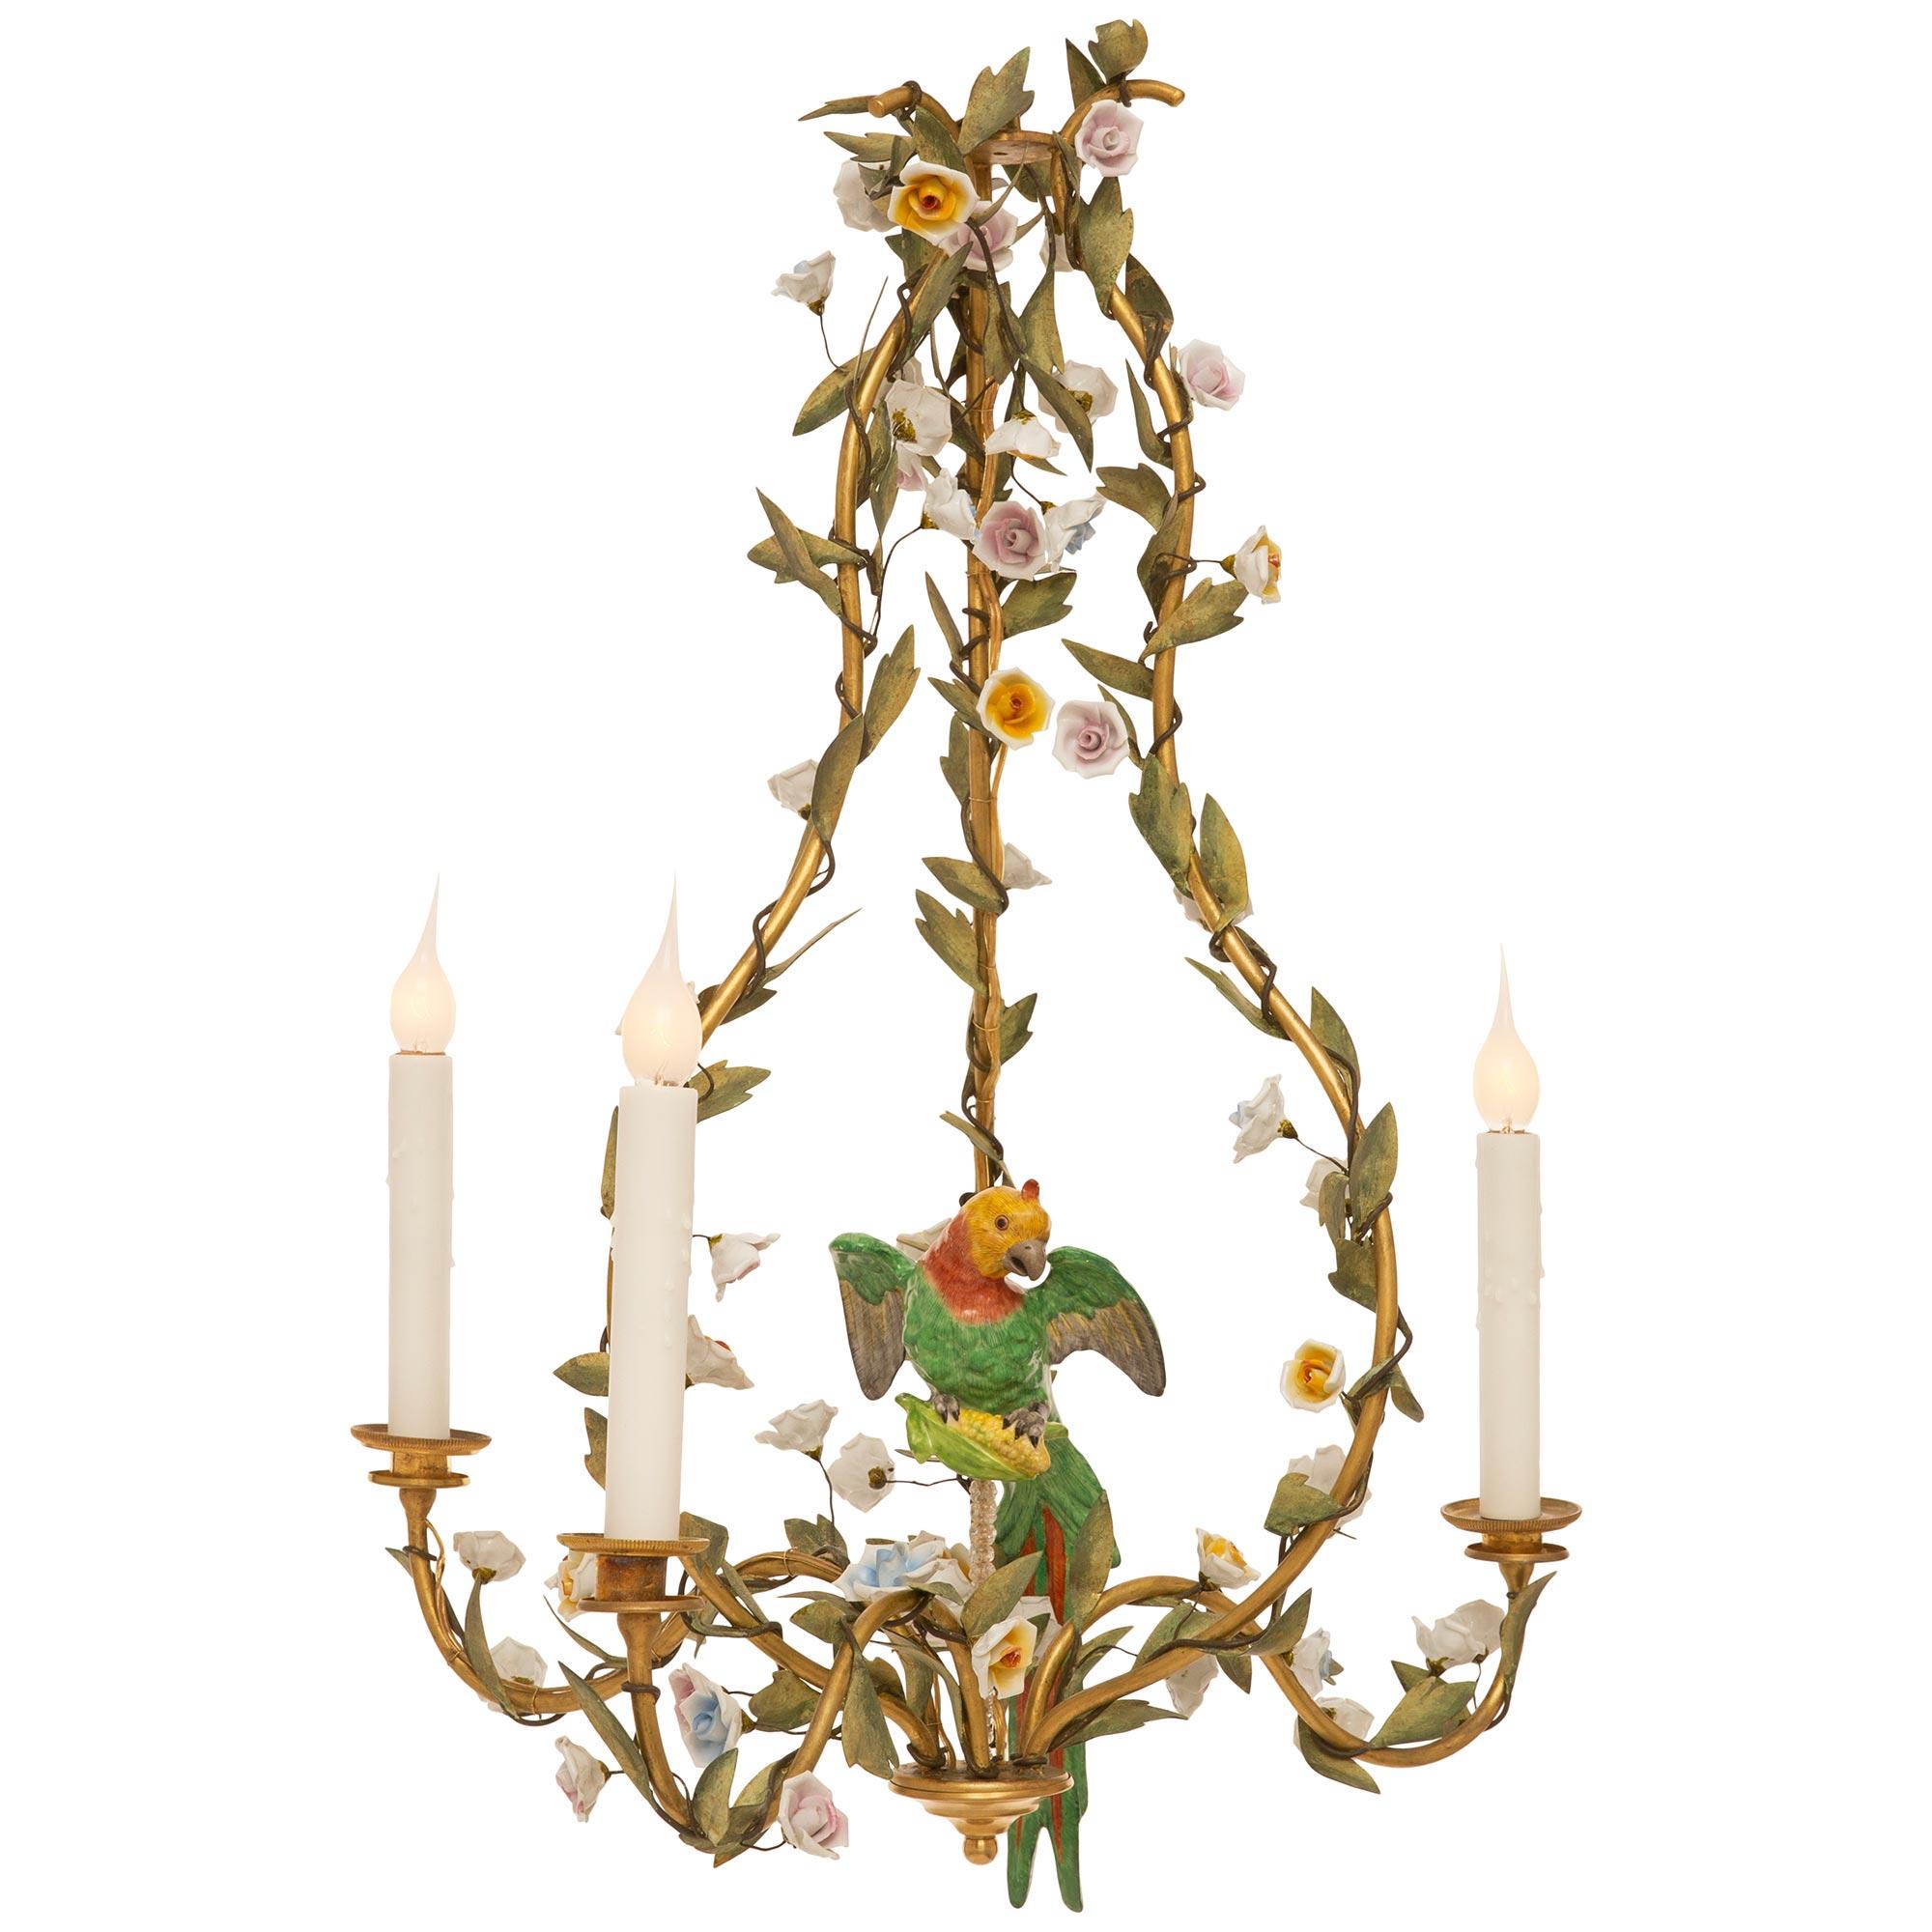 A charming and unique pair of Italian 19th century patinated Tole, Porcelain and gilt metal chandeliers. The three light three arm chandeliers display S scrolled gilt metal arms decorated with wrap around foliate branches and wonderfully colored